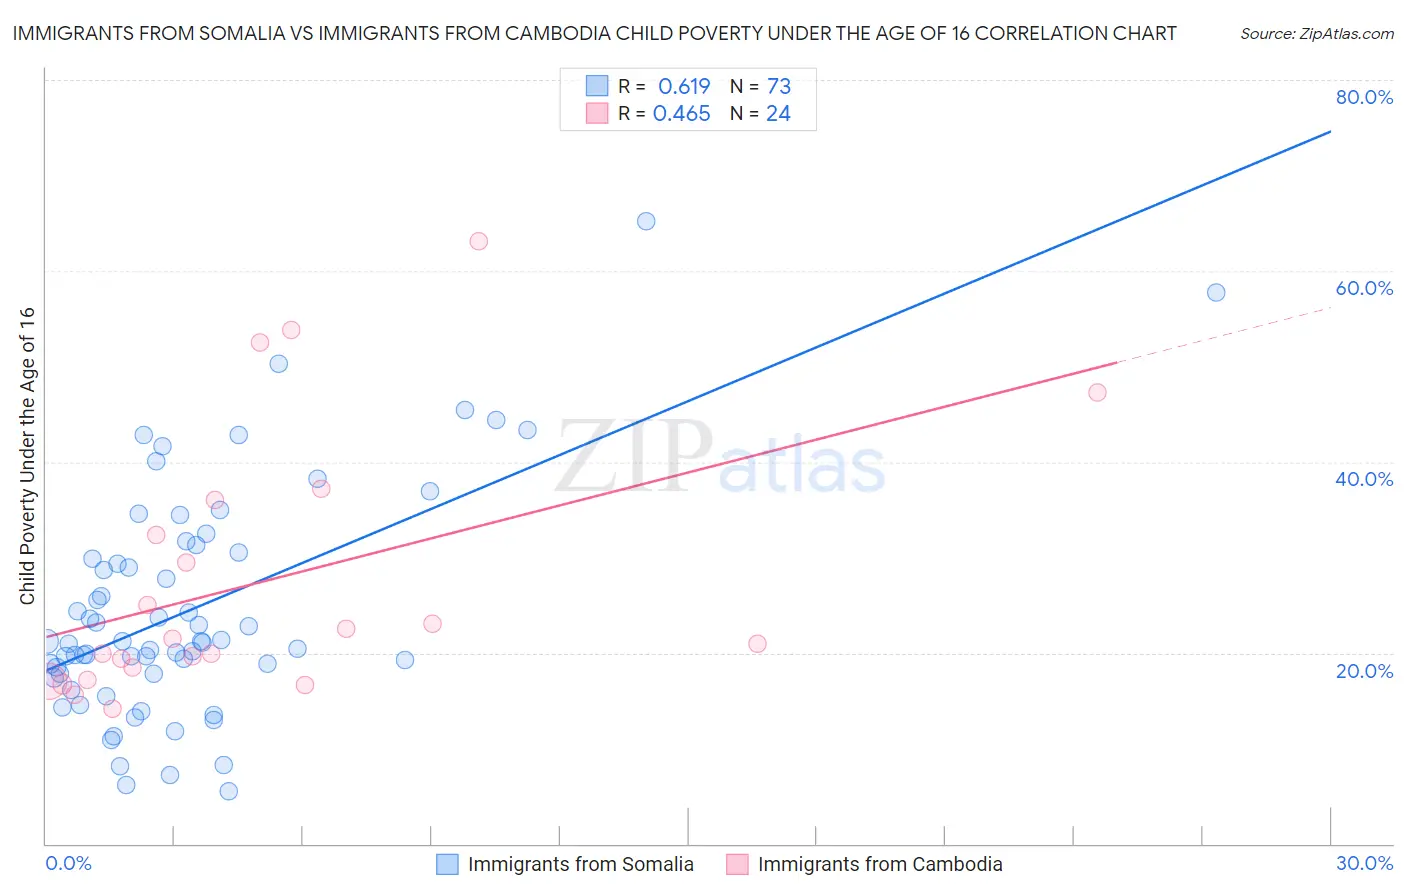 Immigrants from Somalia vs Immigrants from Cambodia Child Poverty Under the Age of 16